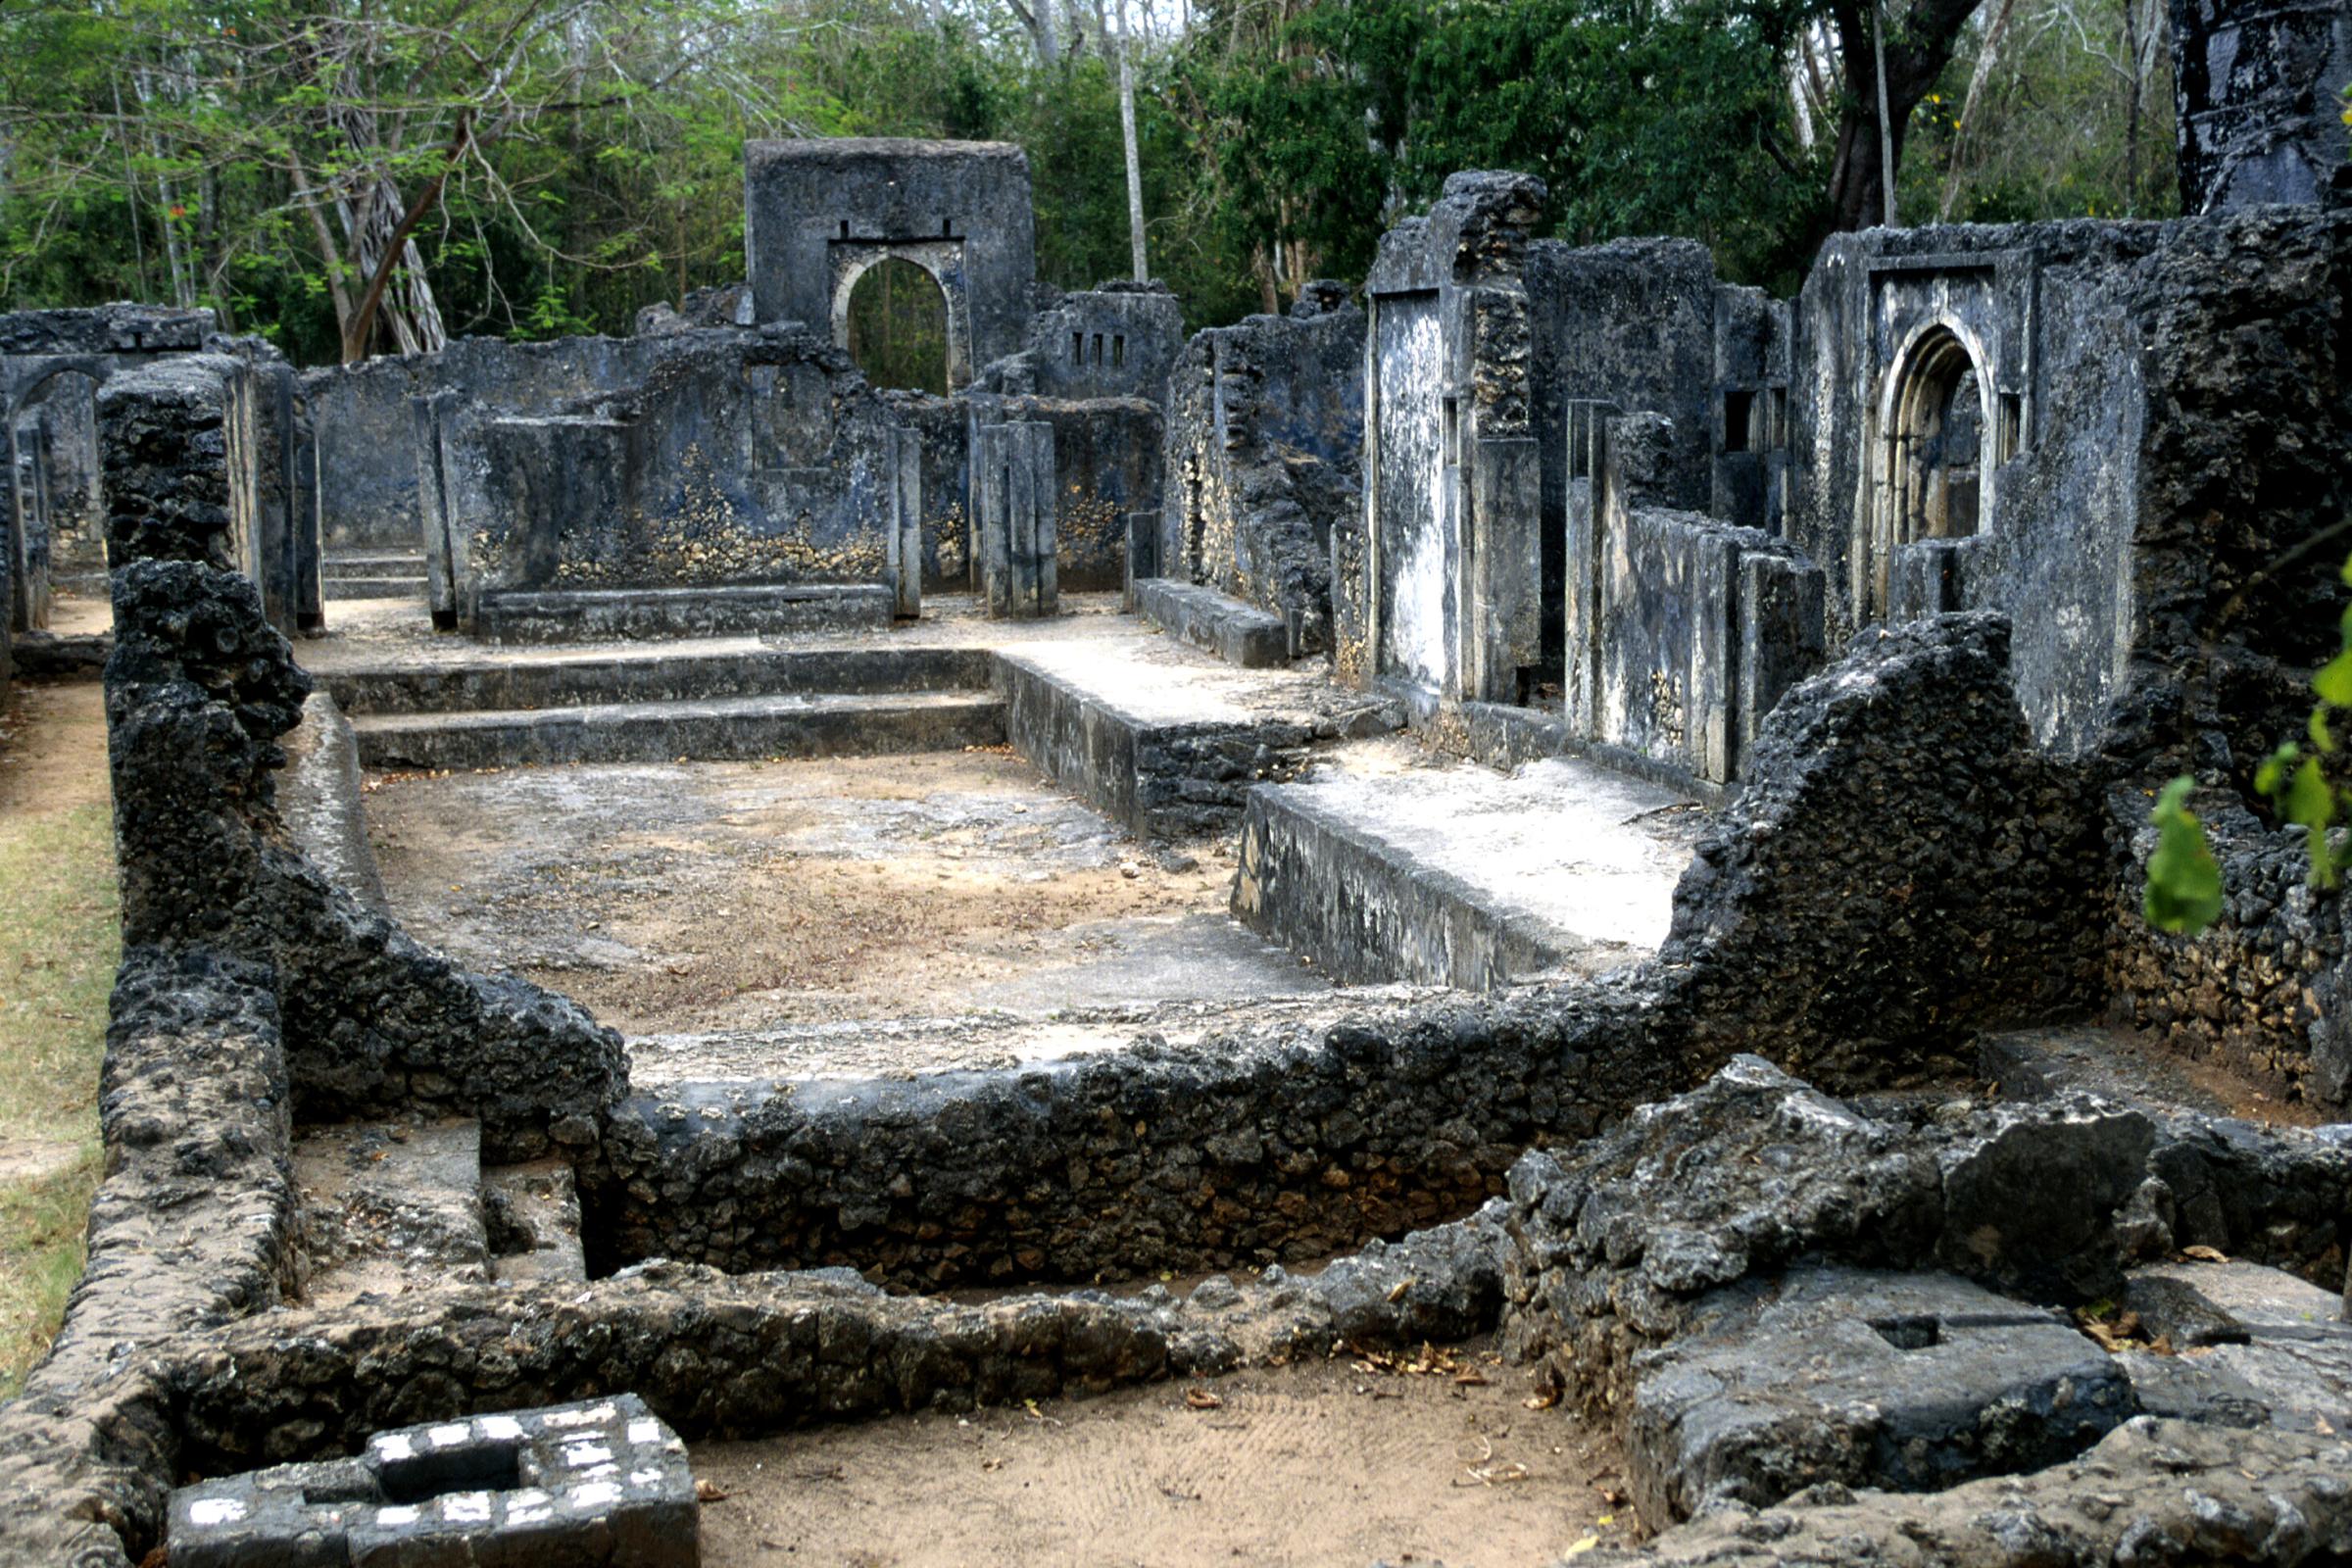 Architectural ruins at the Gedi Historical Monument in Kenya on June 13, 2012.